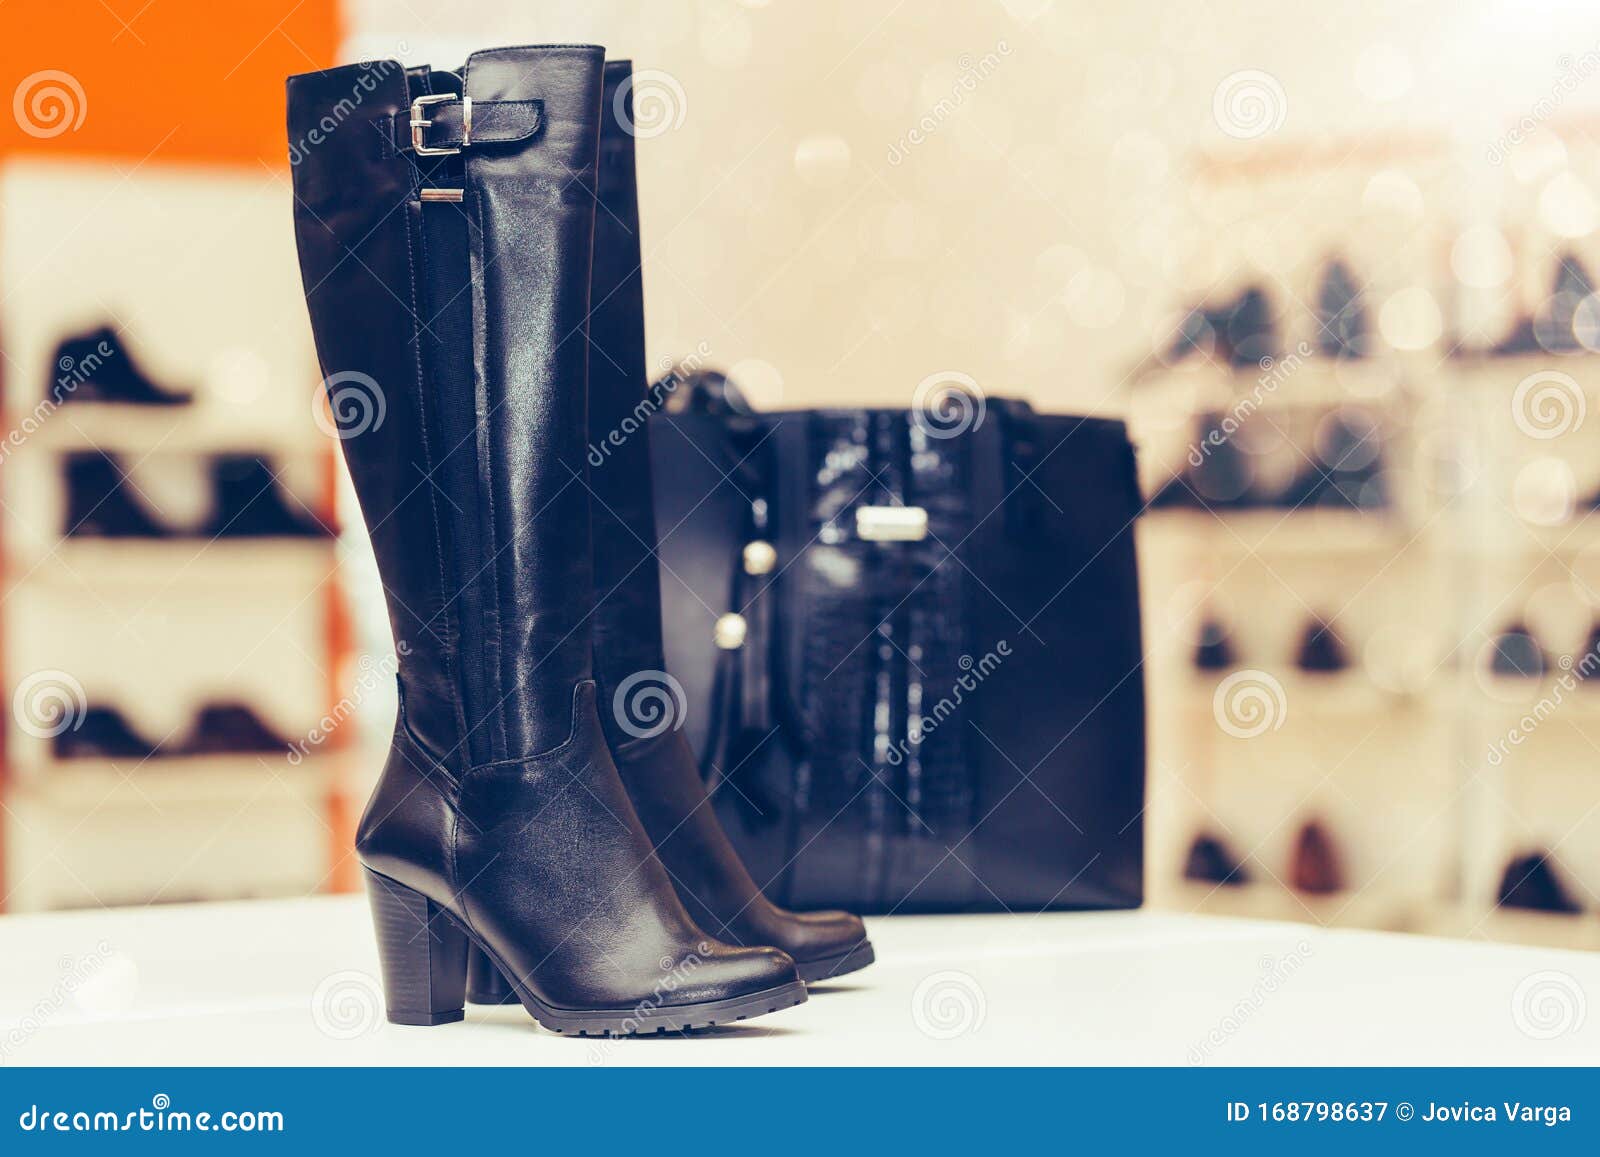 Pair of Elegant Leather Women Boots with High Heels and Women Handbag ...